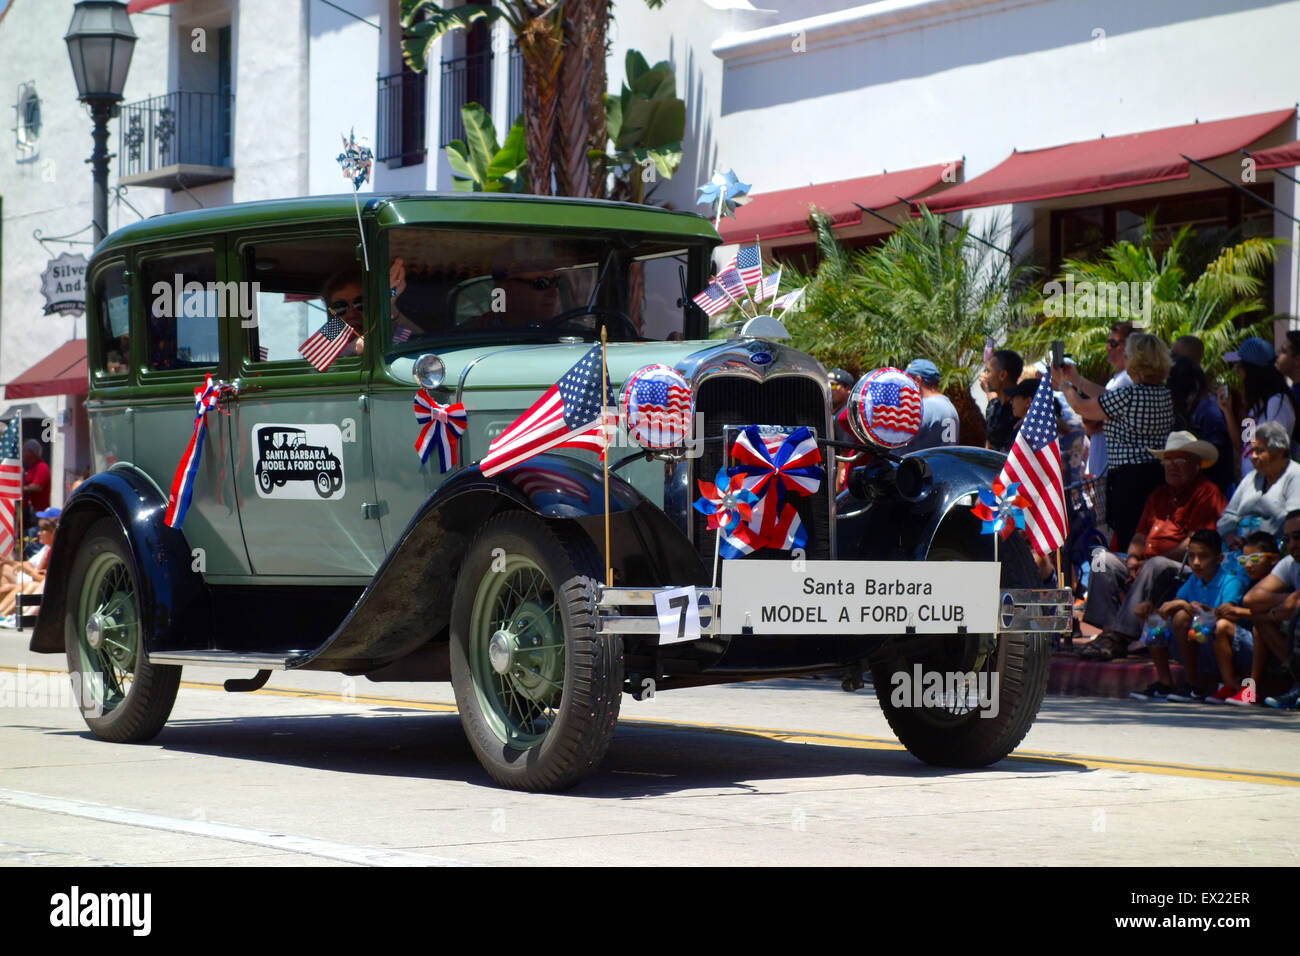 Santa Barbara, California, USA. 4th of July, 2015. An antique Model A Ford car drives down State Street in an Independence Day 'Spirit of '76' parade. Credit: Lisa Werner/Alamy Live News Stock Photo